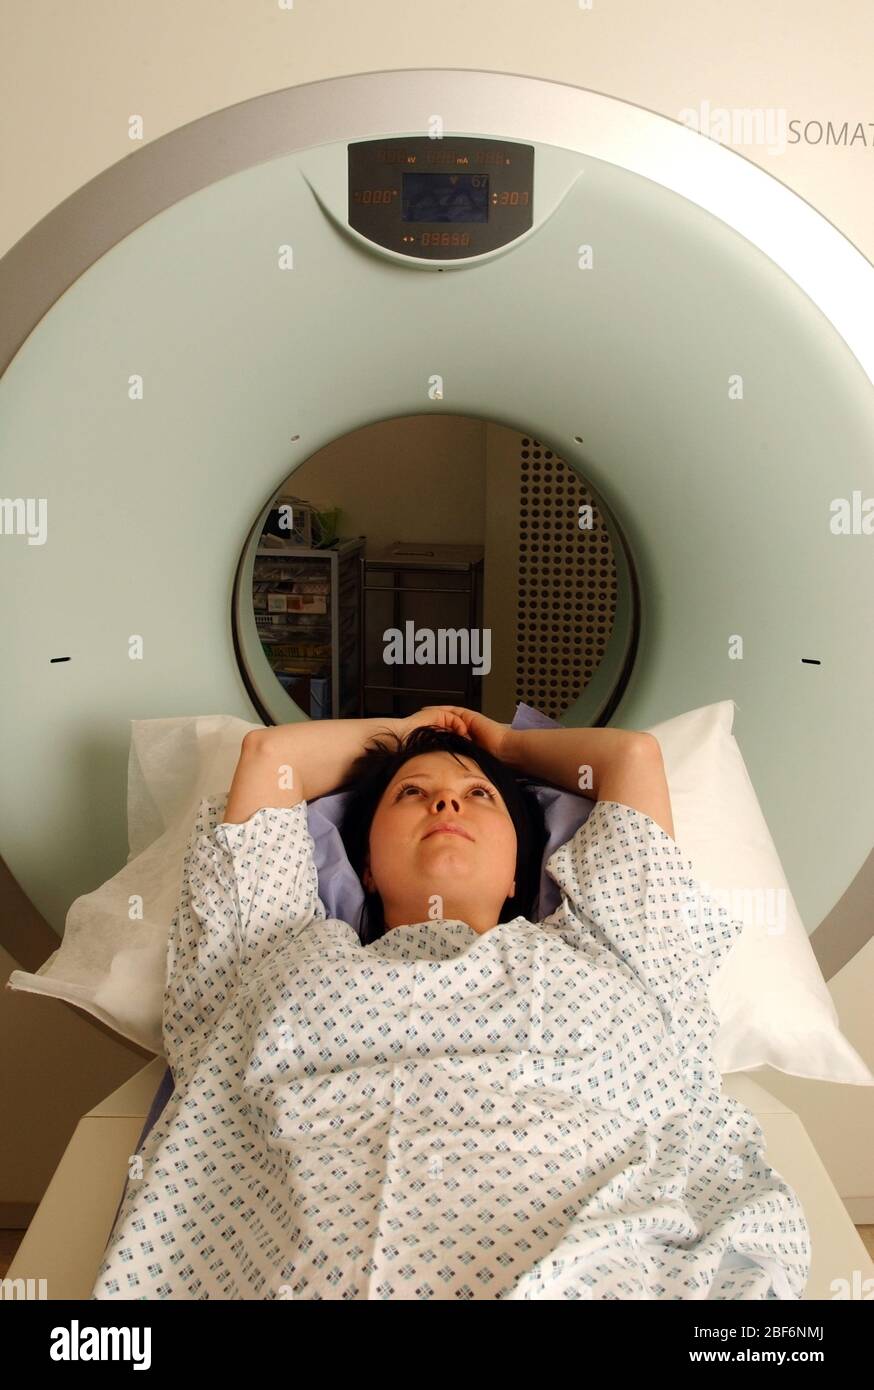 A Siemens CT scanner A patient lies on the examination table of a computed tomography scanner, better known as CAT or CT scanner, which produces three Stock Photo